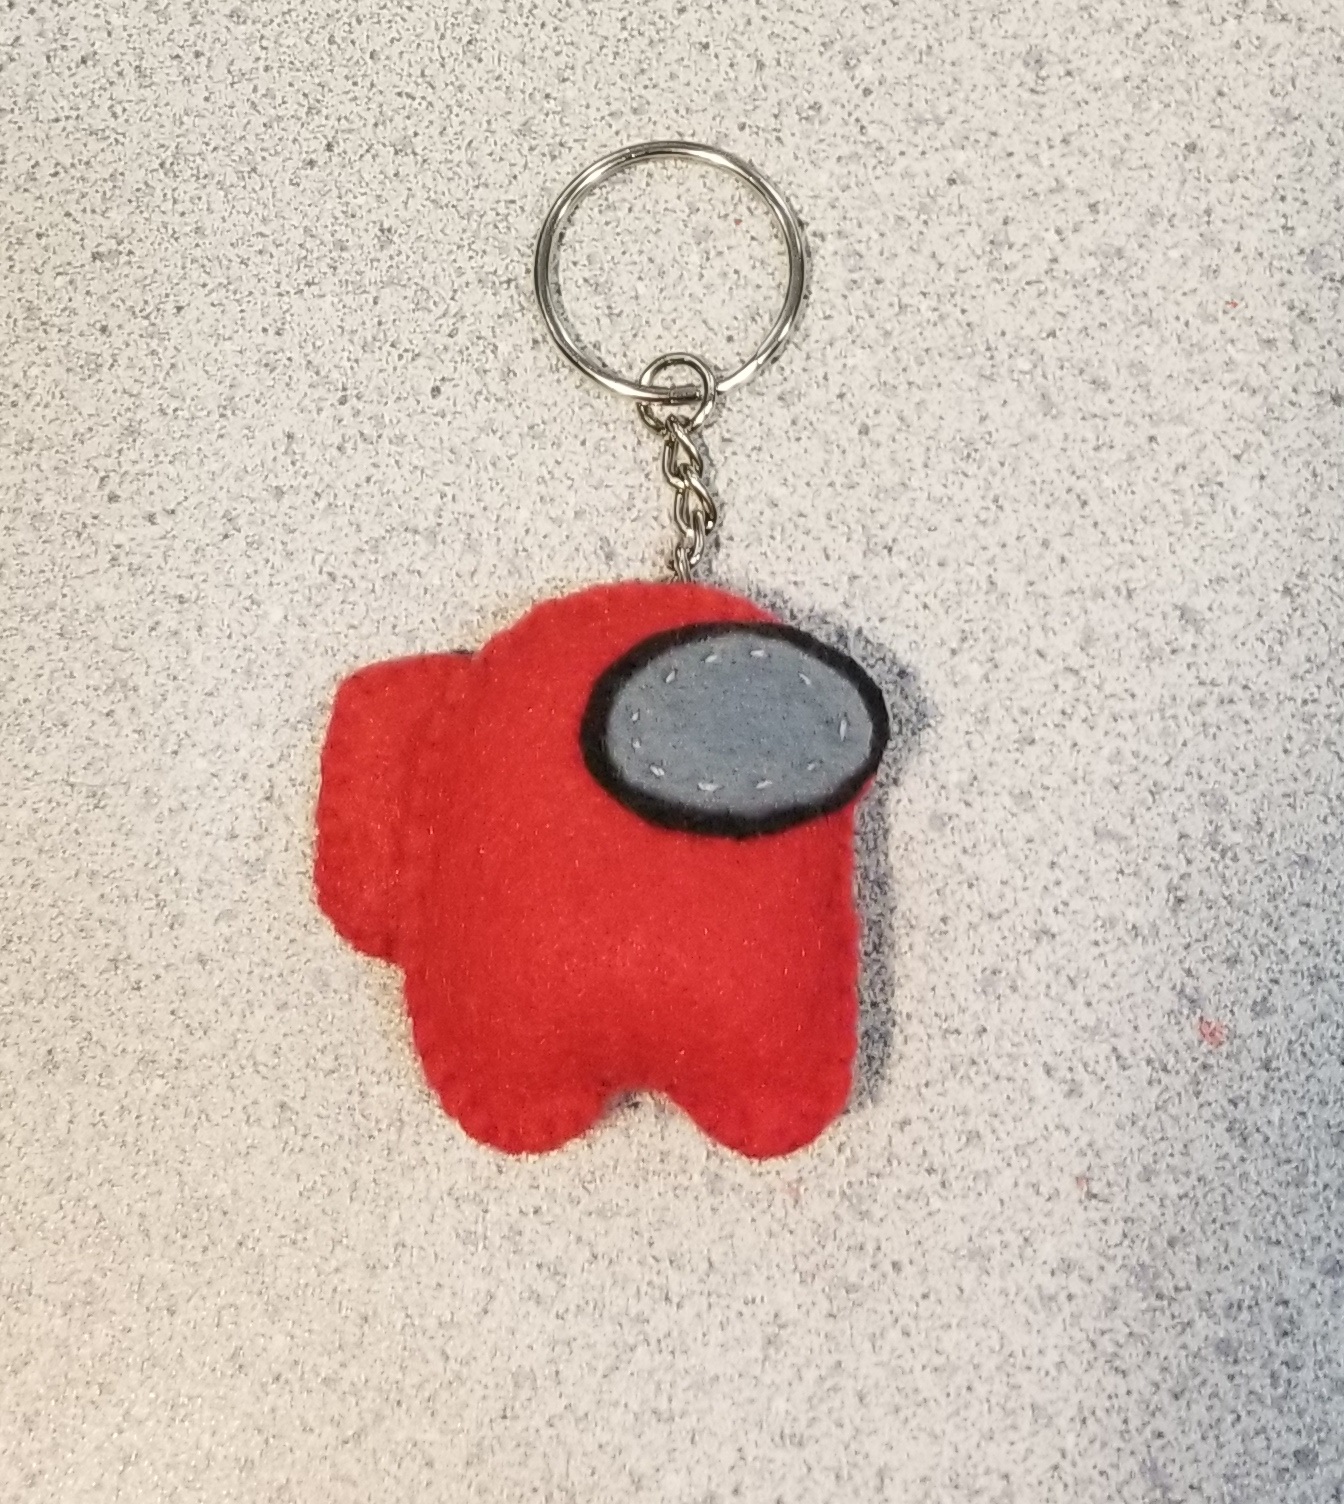 A red felt keychain of a crewmate character from the video game Among Us